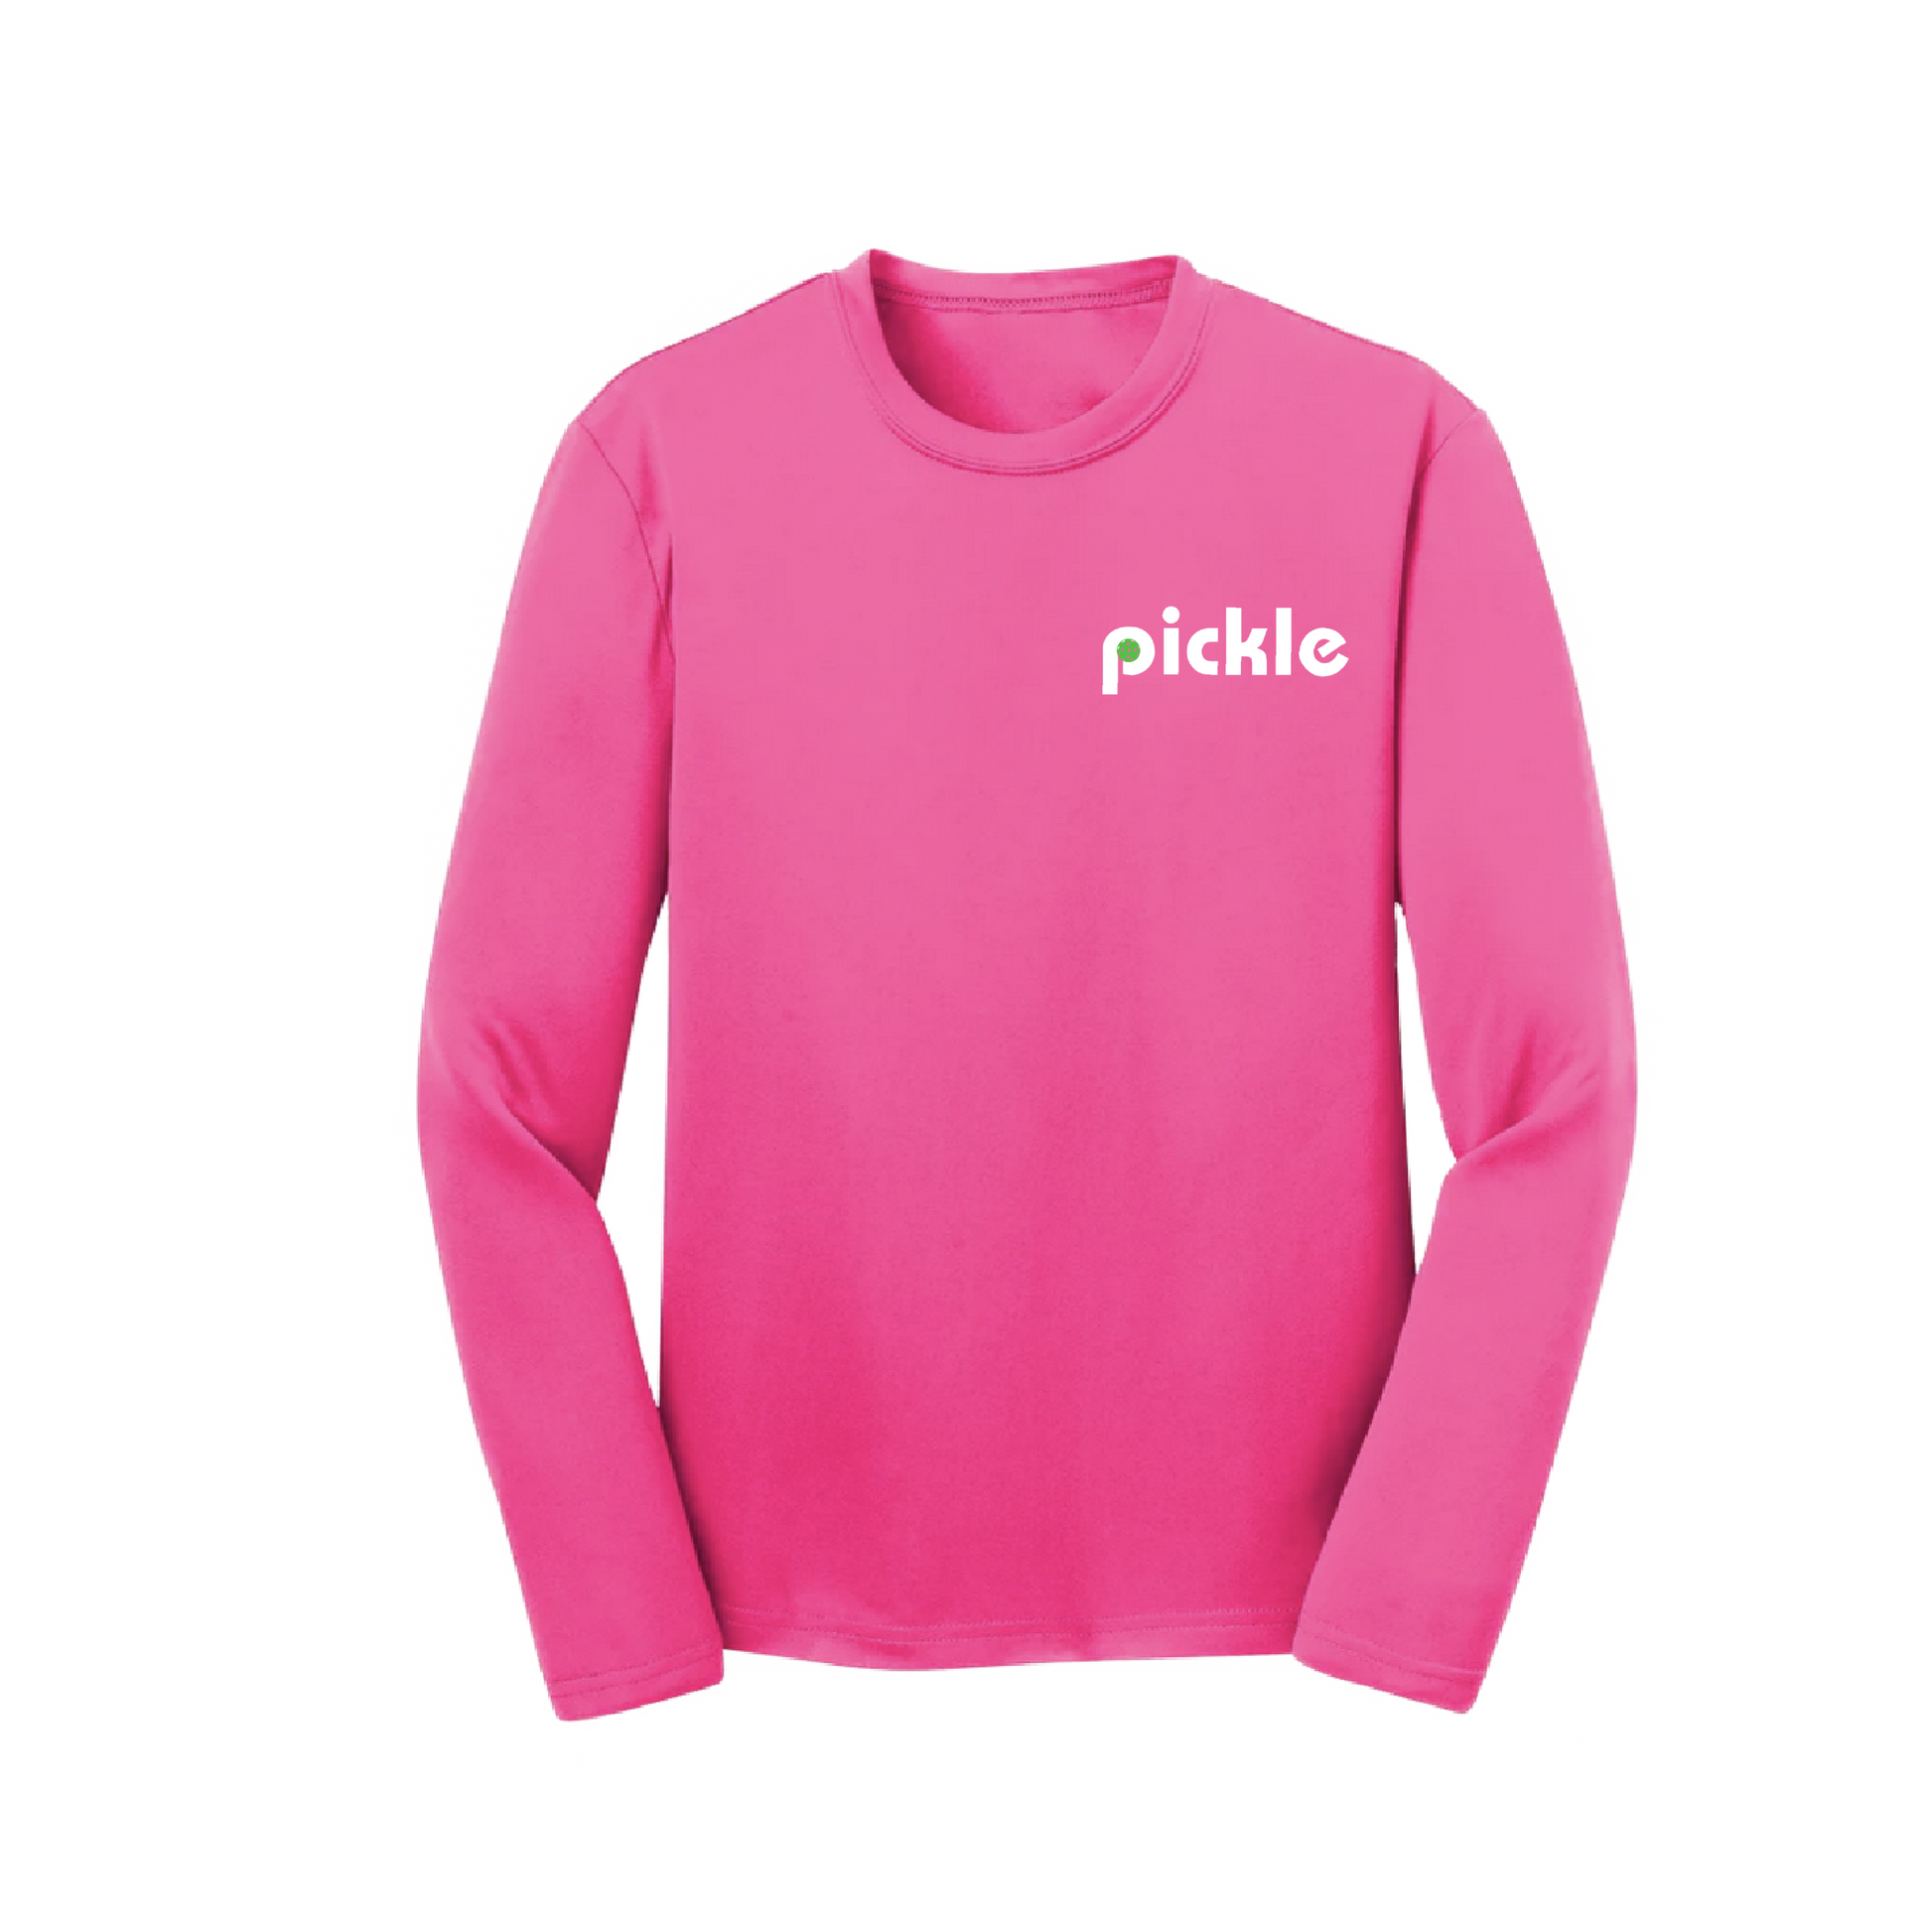 Feel the difference with Pickleball shirts! Crafted for excellence and breathability, these moisture-wicking styles feature PosiCharge tech to lock in color and prevent logos from fading. Enjoy lightweight, roomy comfort with removable tags and set-in sleeves.